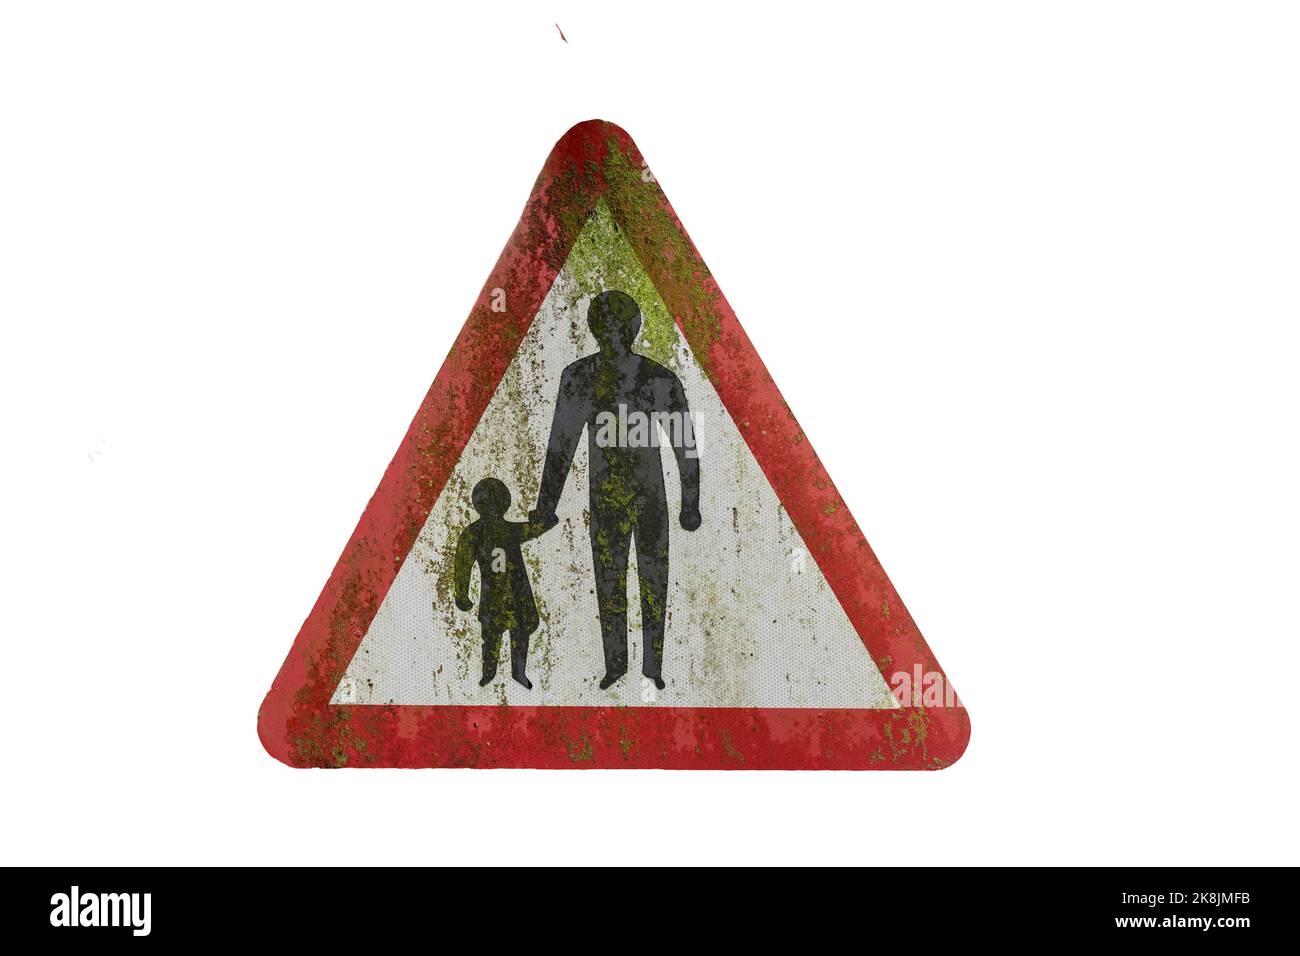 Road sign warning of pedestrians present Stock Photo